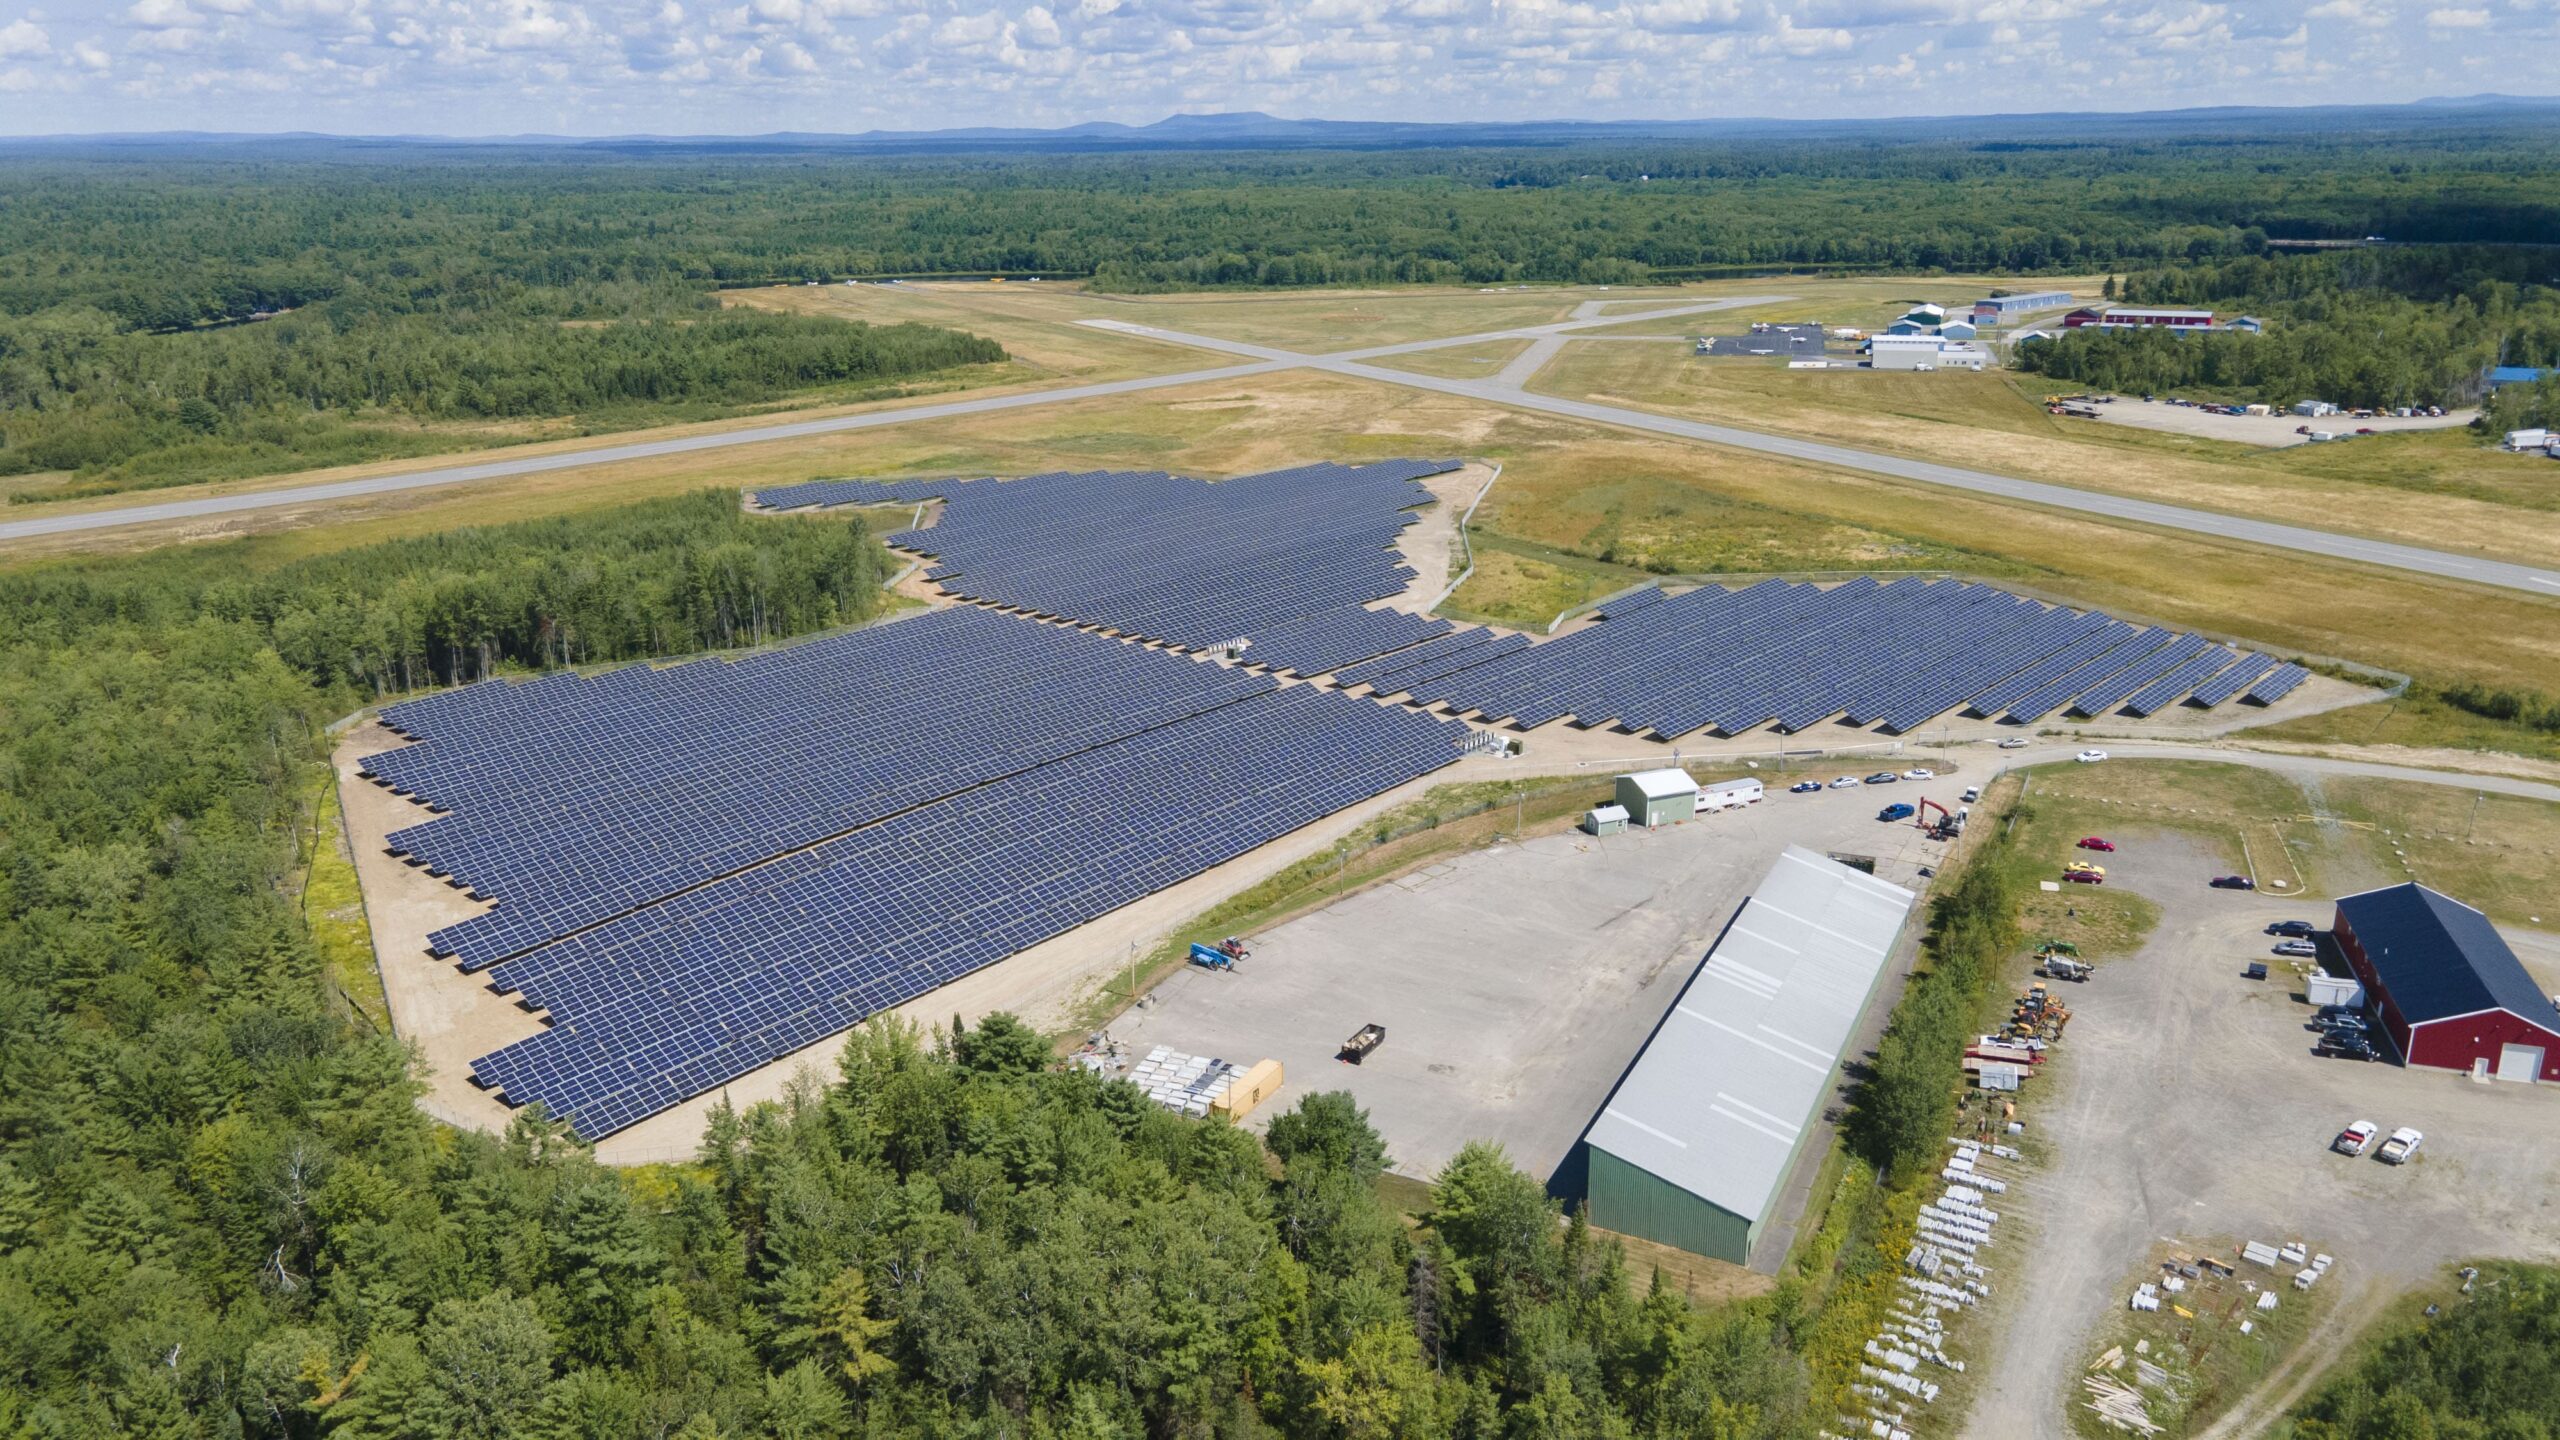 Dewitt - Syncarpha Capital solar project constructed on Dewitt Airfield in Old Town, Maine - 2